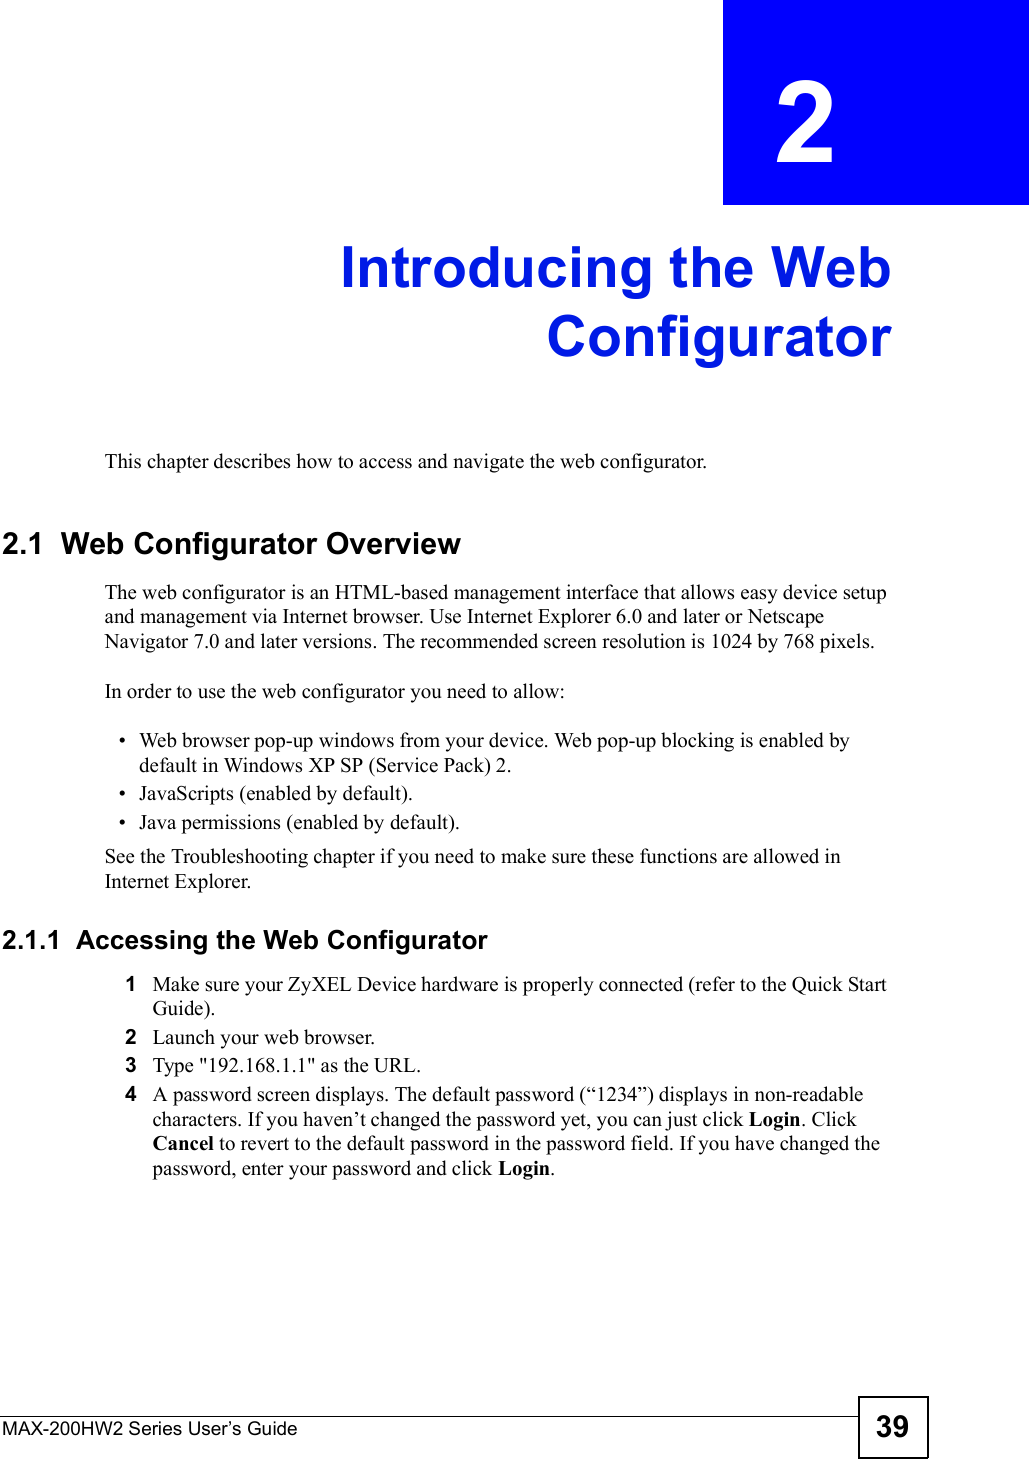 MAX-200HW2 Series User s Guide 39CHAPTER  2 Introducing the WebConfiguratorThis chapter describes how to access and navigate the web configurator.2.1  Web Configurator OverviewThe web configurator is an HTML-based management interface that allows easy device setup and management via Internet browser. Use Internet Explorer 6.0 and later or Netscape Navigator 7.0 and later versions. The recommended screen resolution is 1024 by 768 pixels.In order to use the web configurator you need to allow: Web browser pop-up windows from your device. Web pop-up blocking is enabled by default in Windows XP SP (Service Pack) 2. JavaScripts (enabled by default). Java permissions (enabled by default).See the Troubleshooting chapter if you need to make sure these functions are allowed in Internet Explorer.2.1.1  Accessing the Web Configurator1Make sure your ZyXEL Device hardware is properly connected (refer to the Quick Start Guide).2Launch your web browser.3Type &quot;192.168.1.1&quot; as the URL.4A password screen displays. The default password (&quot;1234#) displays in non-readable characters. If you haven!t changed the password yet, you can just click Login. Click Cancel to revert to the default password in the password field. If you have changed the password, enter your password and click Login.